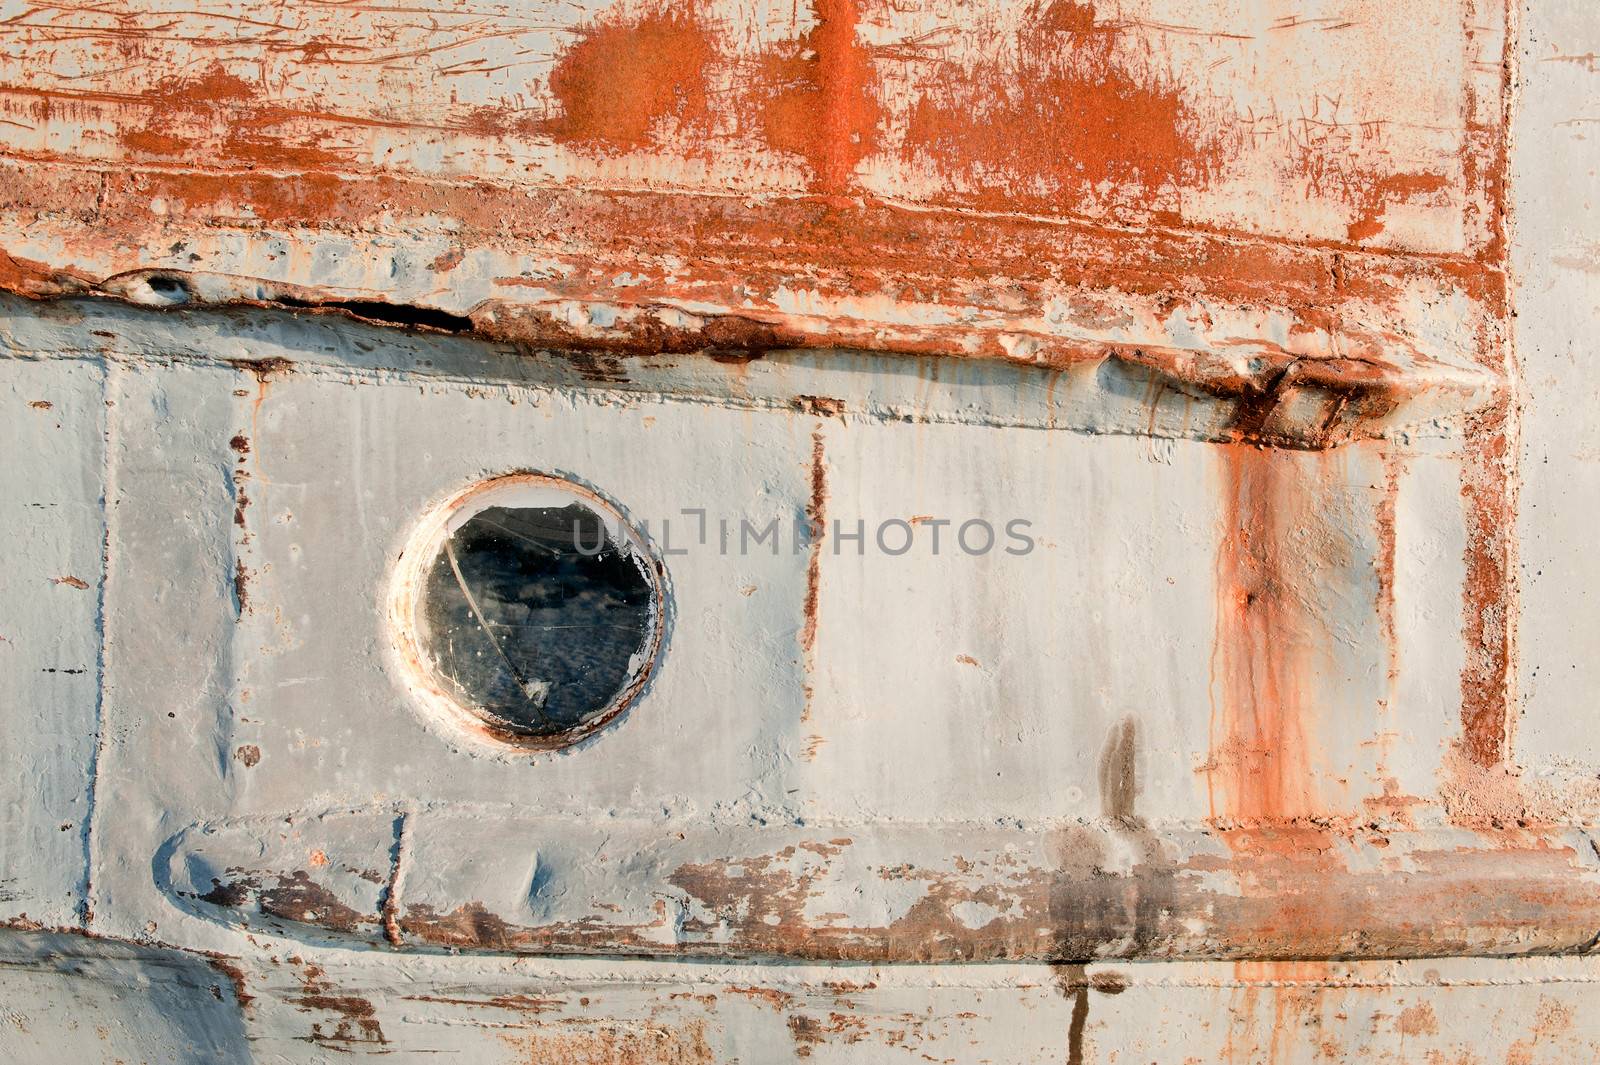 Portholes on the old rust ships 